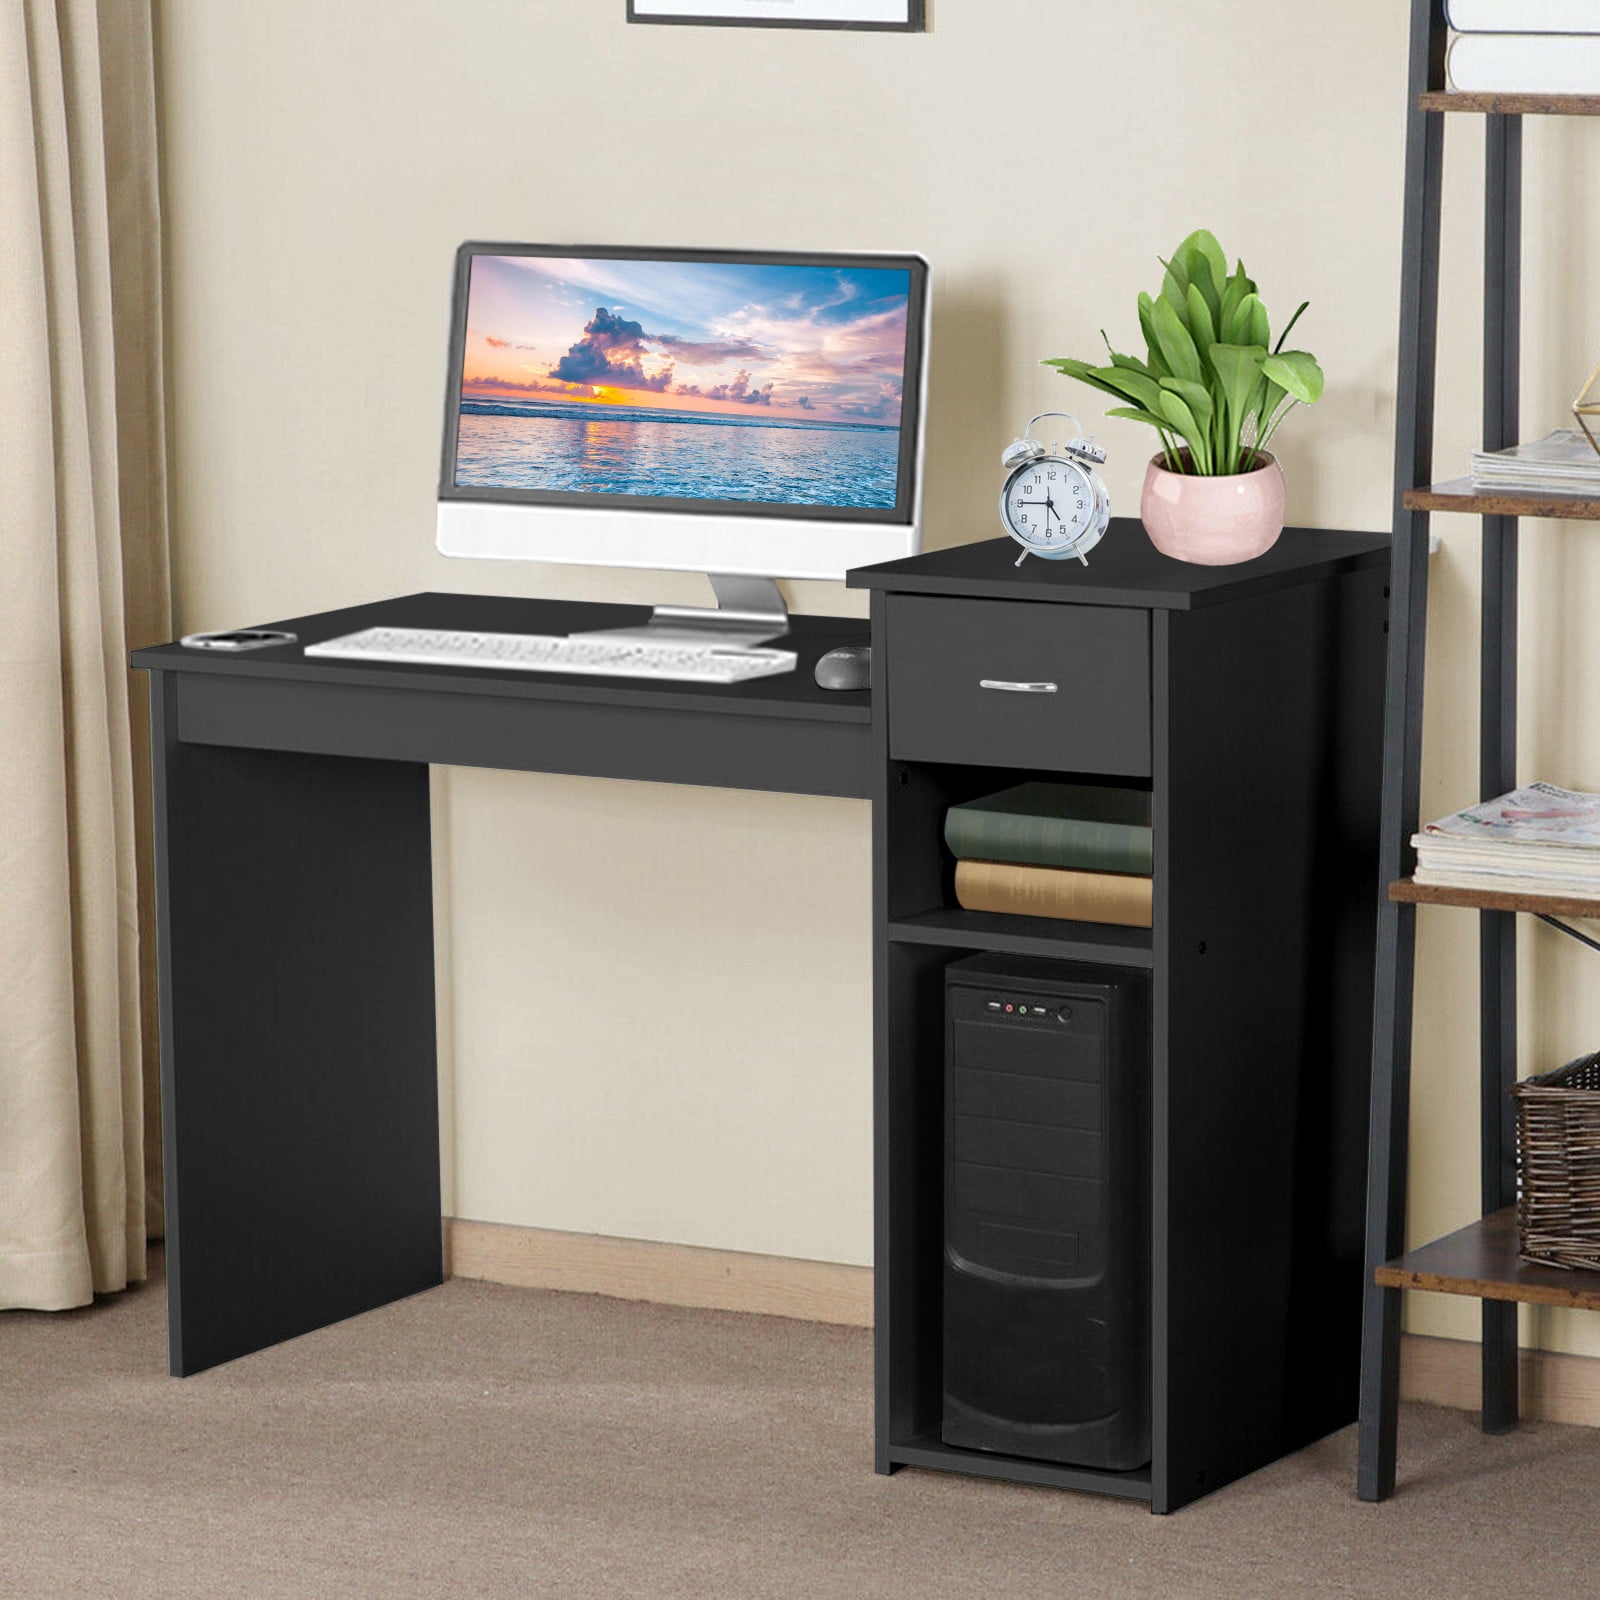 Details about   Home Desktop Computer Desk With Drawers Home Small Desk Dormitory Study Desk 